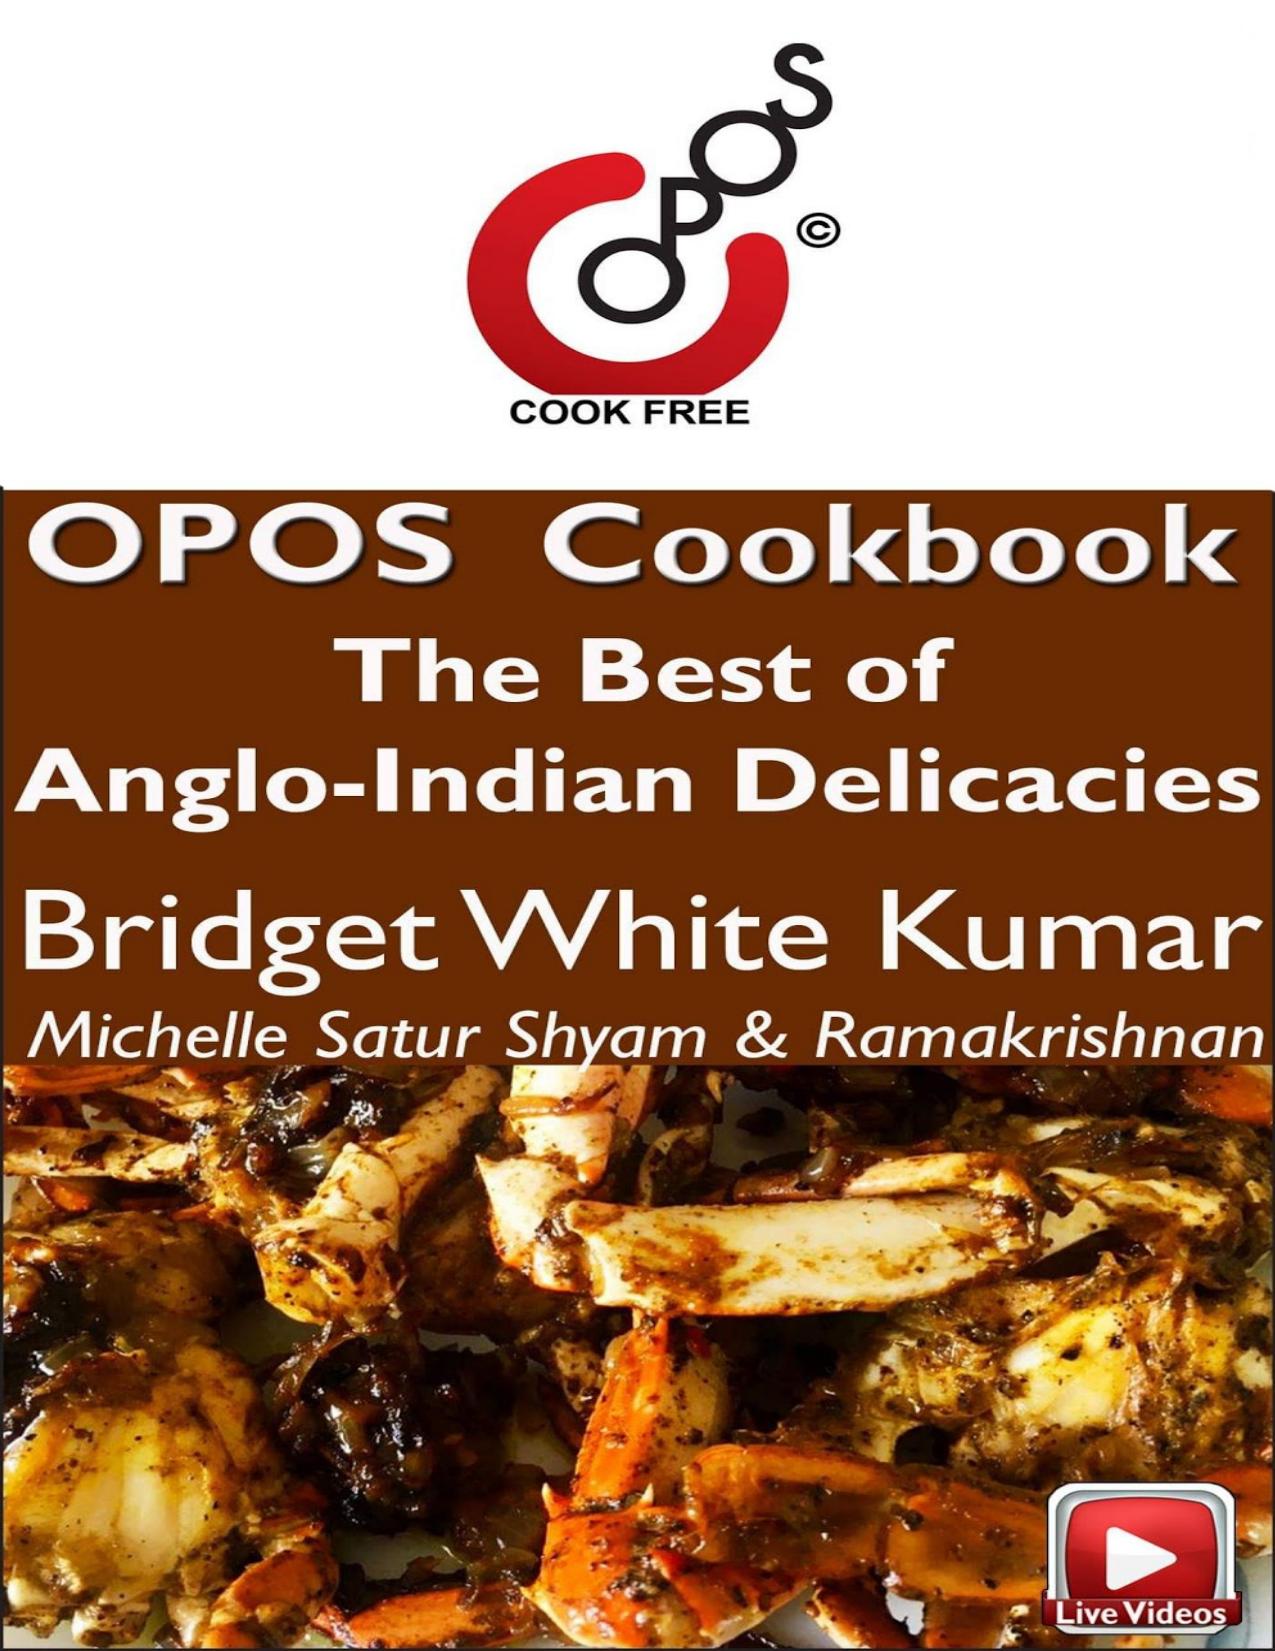 The Best of Anglo-Indian Delicacies: OPOS Cookbook by Michelle Bridget White Kumar